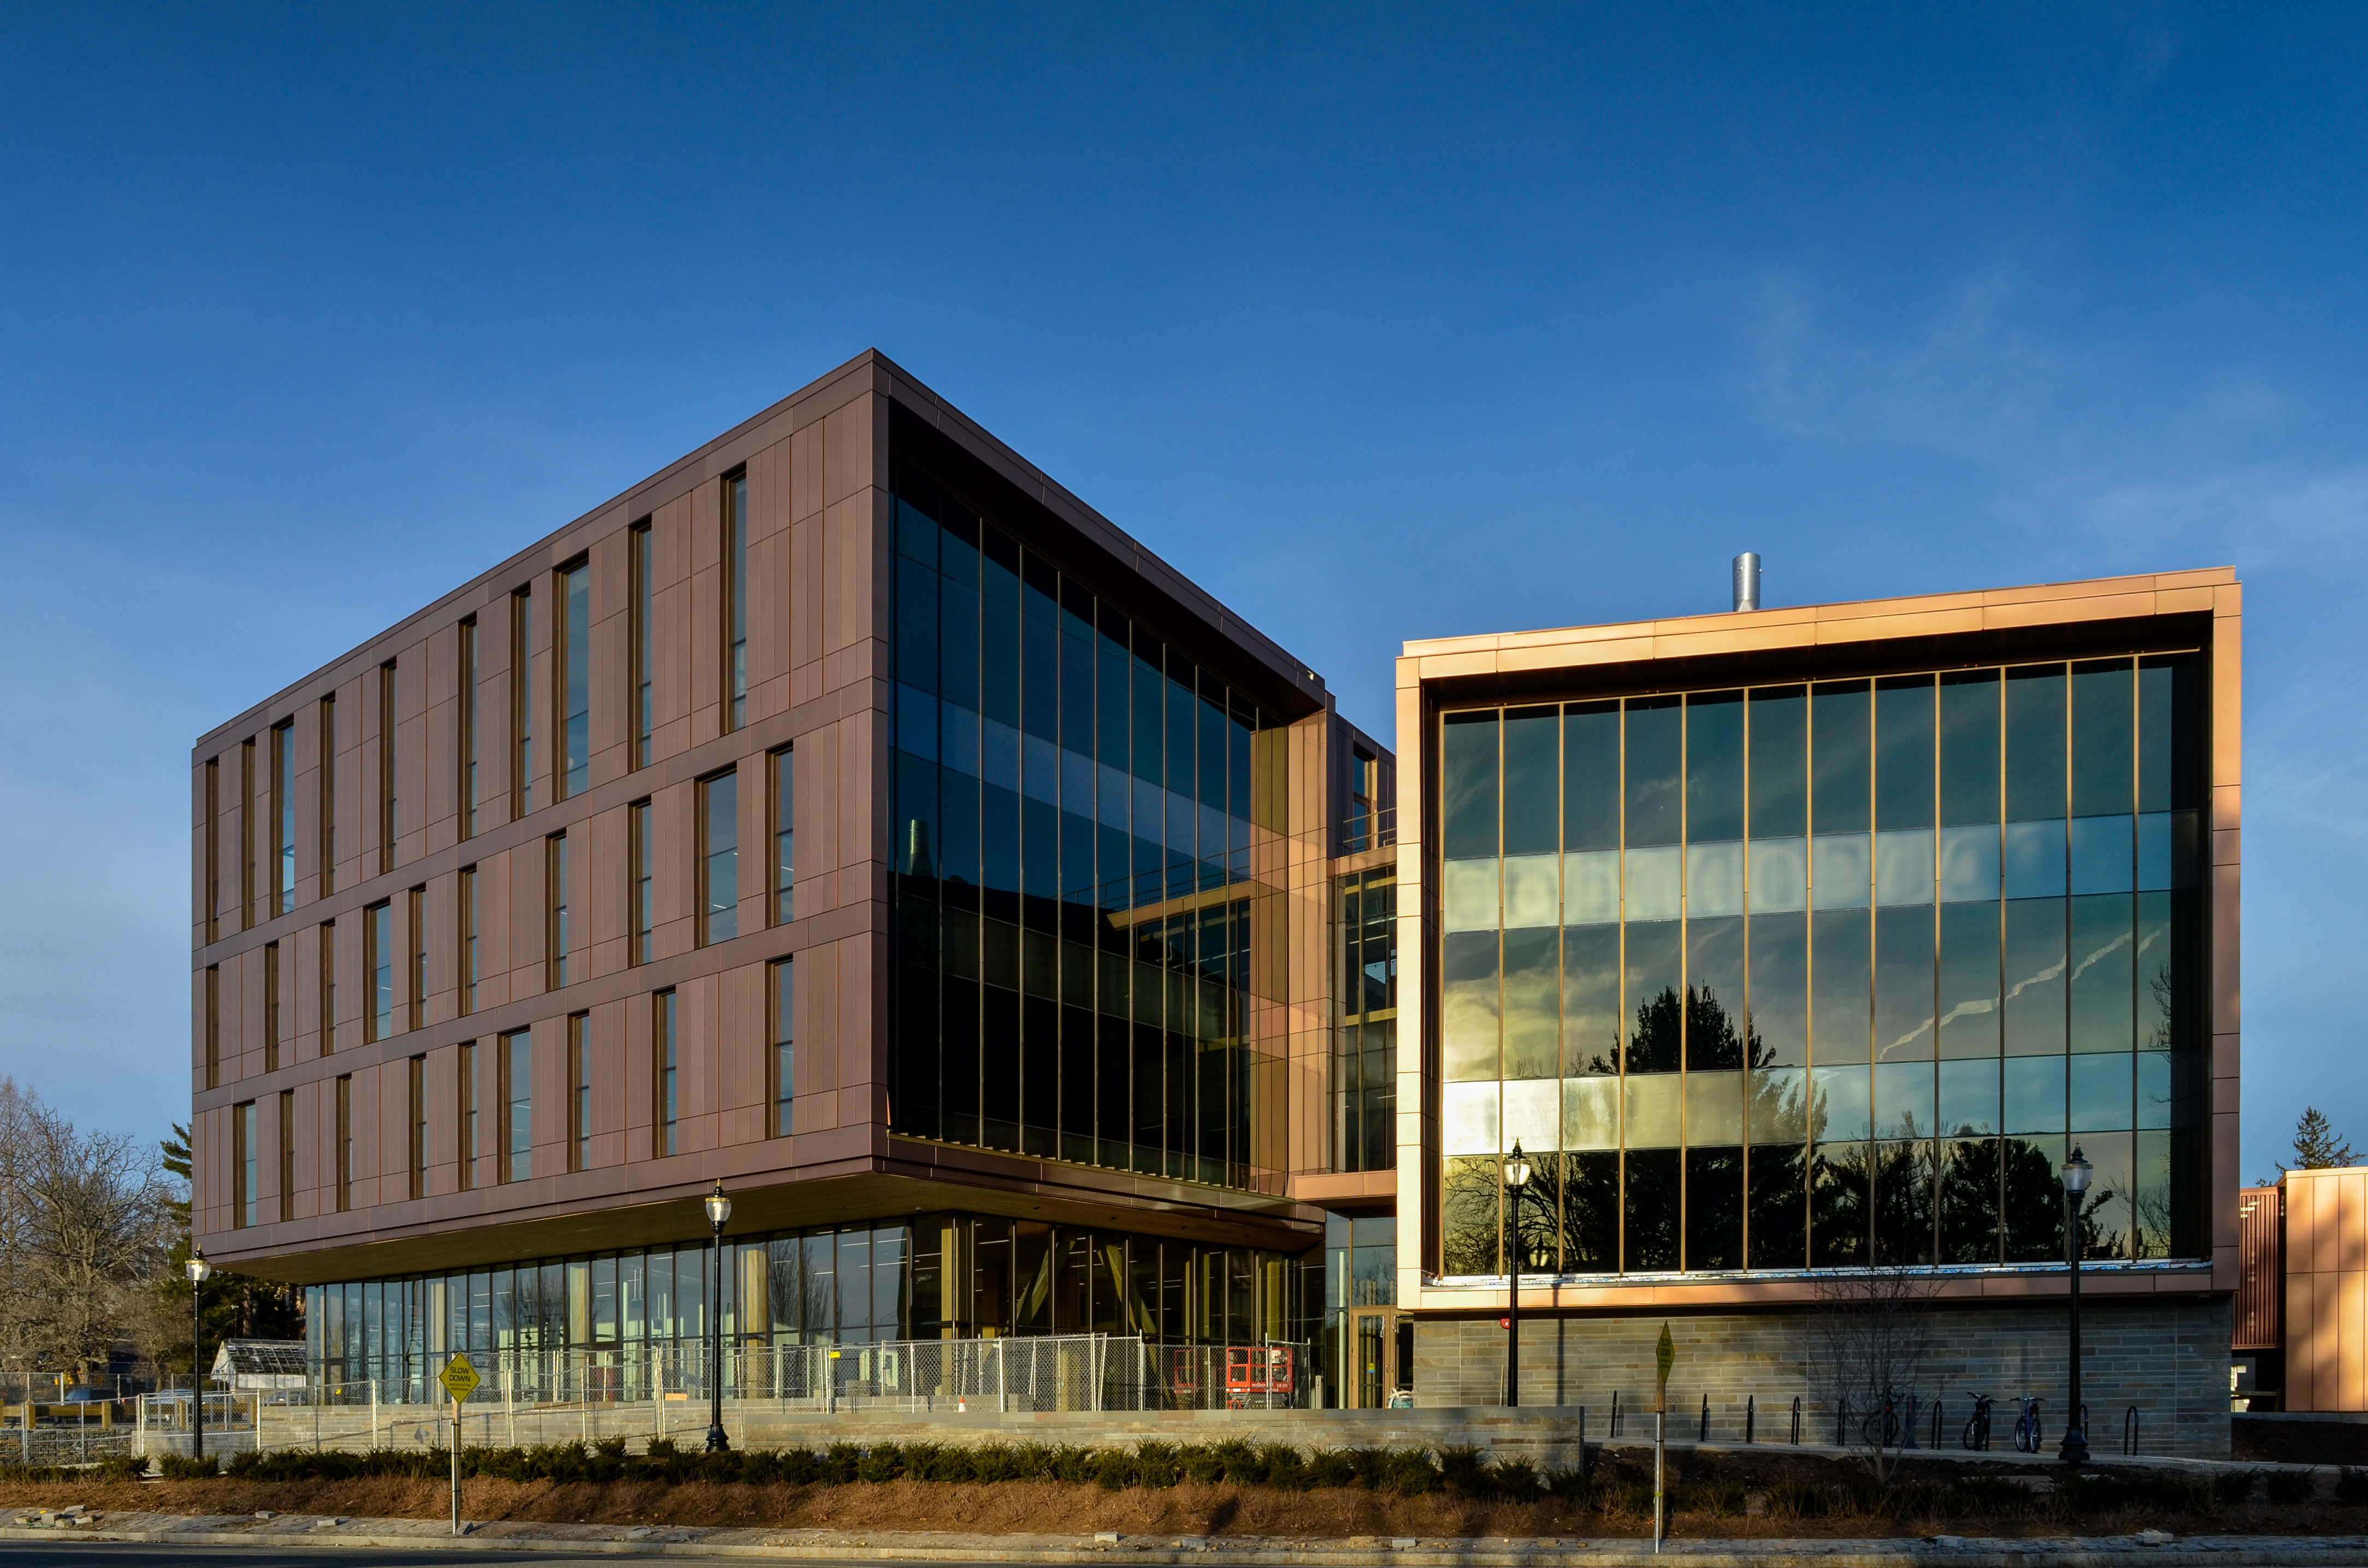 UMass Design Building: A Firsthand Account from Design through Owner Occupancy